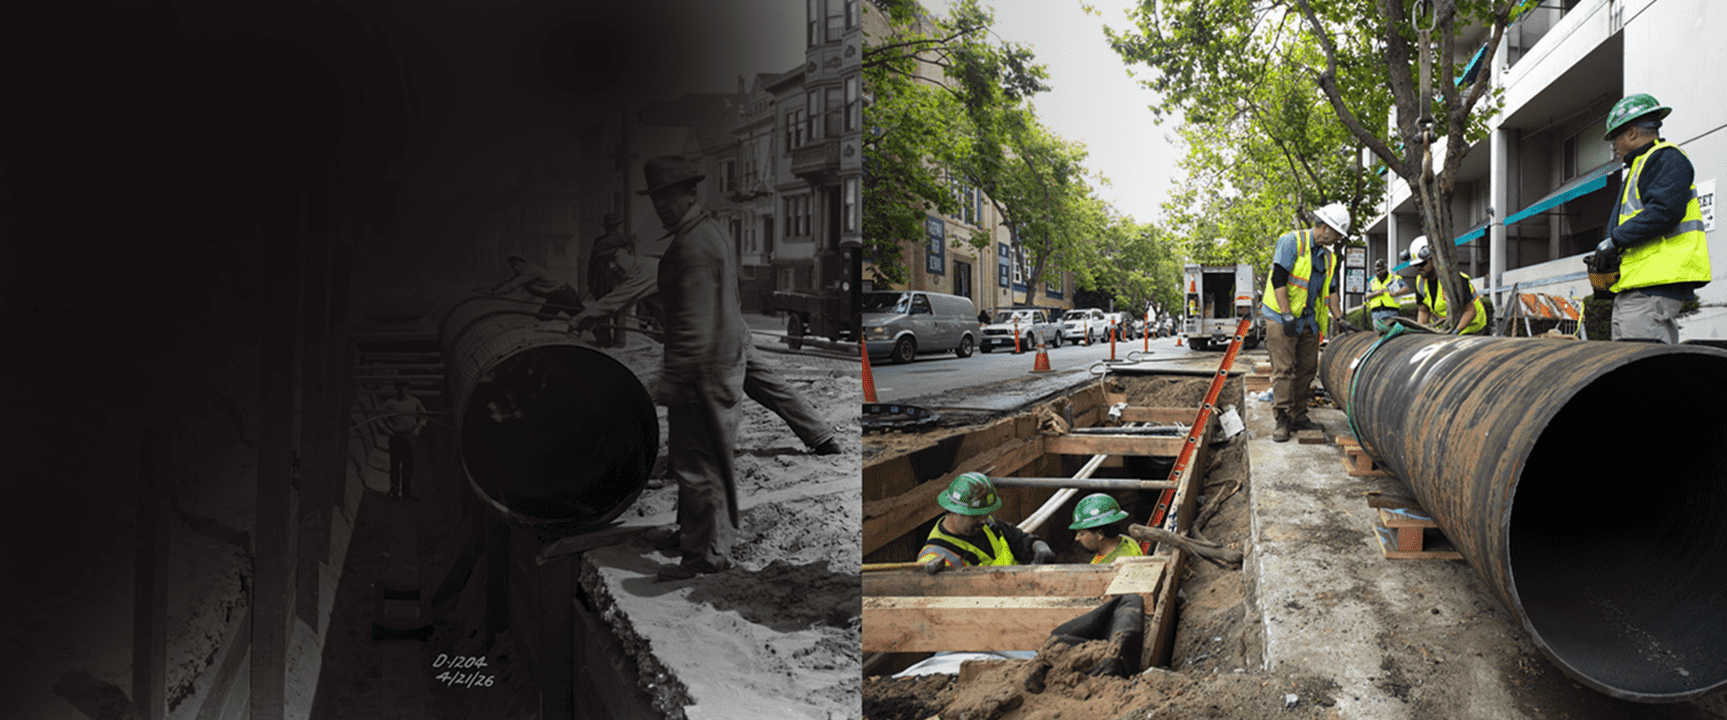 Laying sewer pipes in 1926 (black and white) next to current day work.